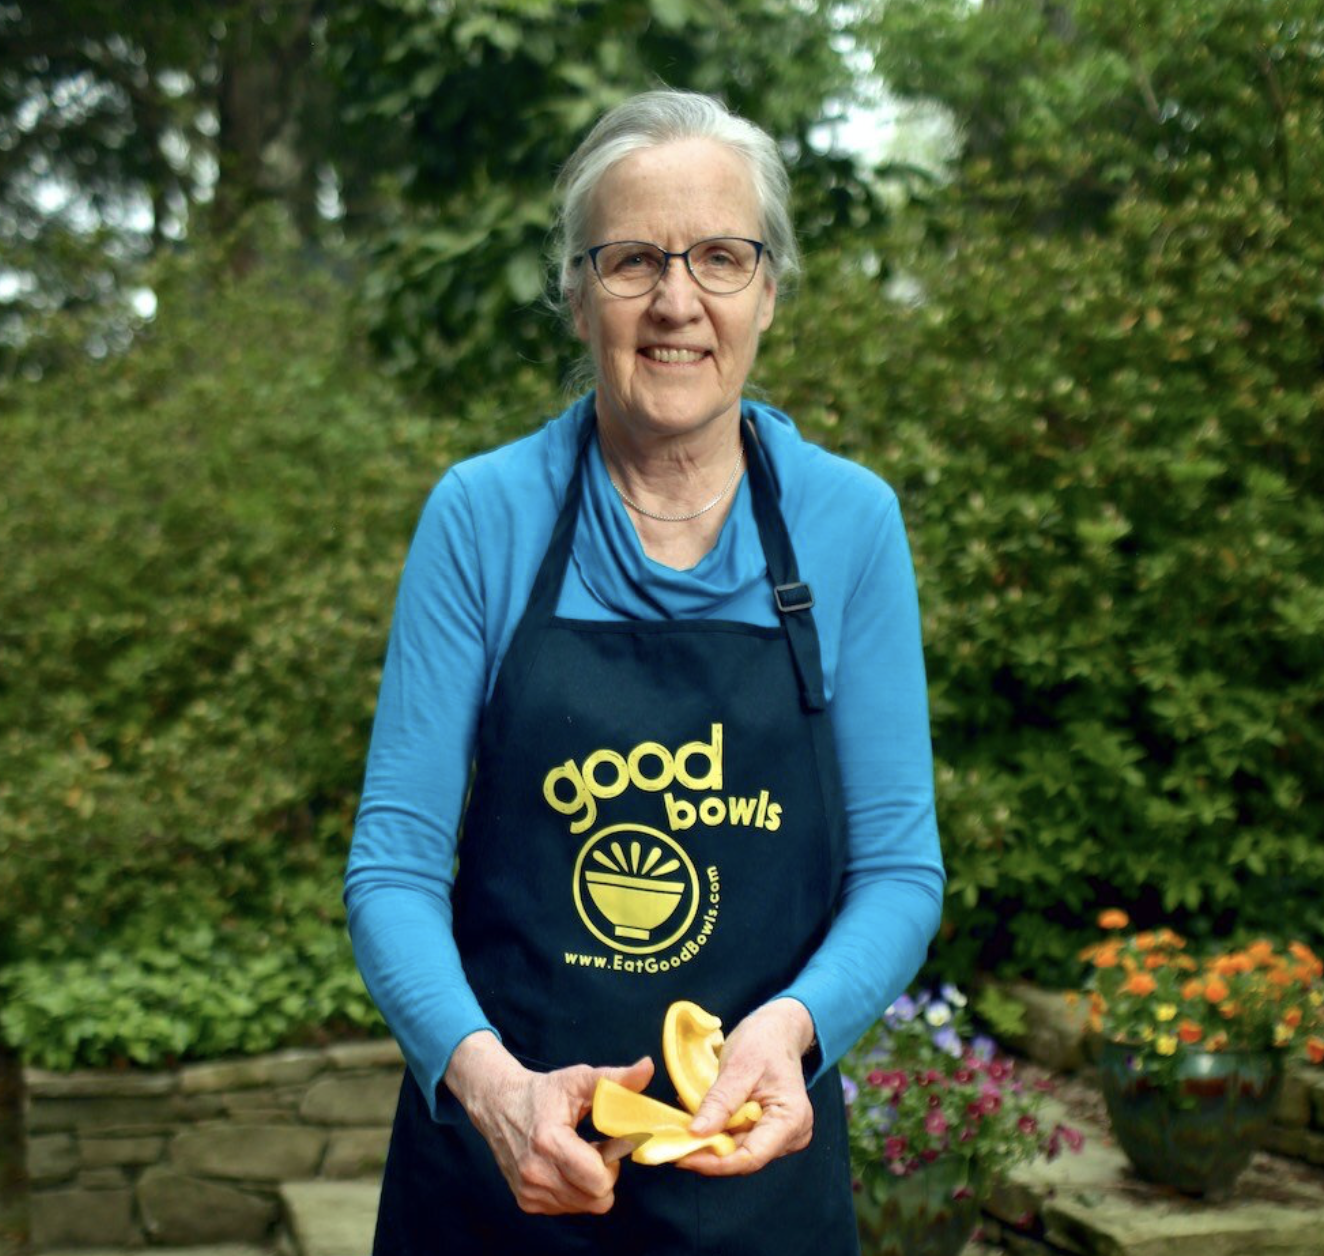 Alice Ammerman, DrPH, is Nourishing Communities with Good Bowls